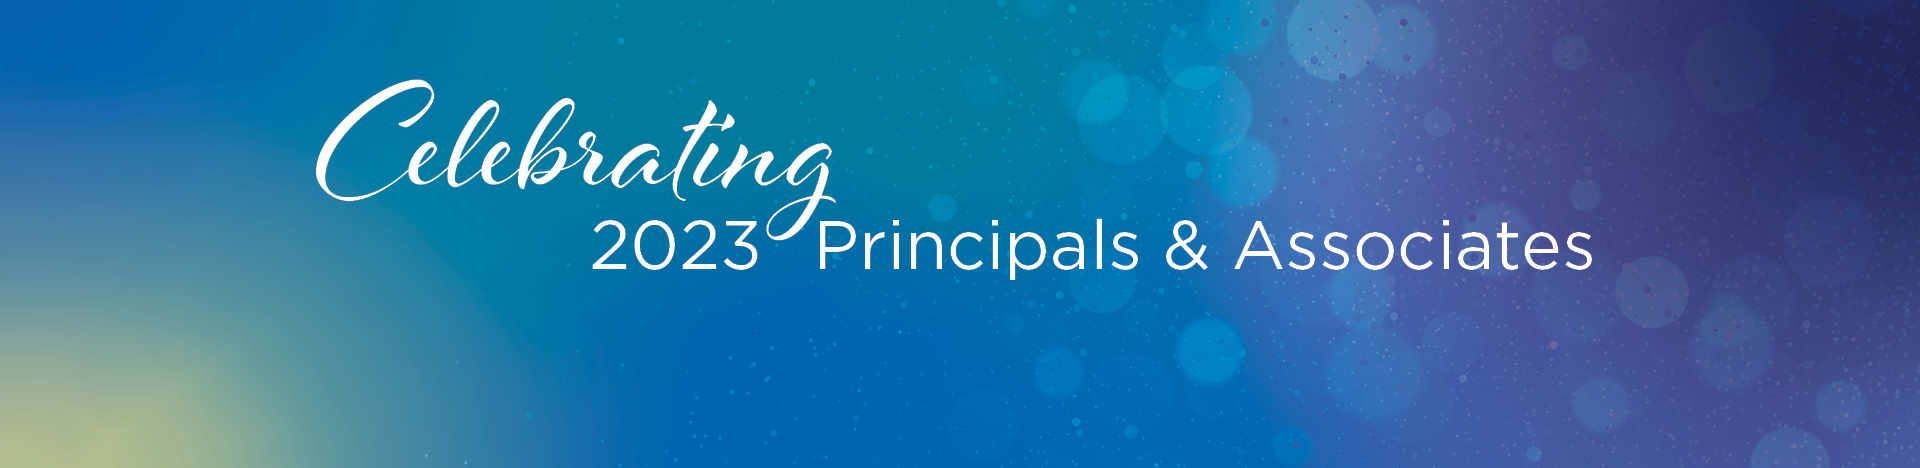 Banner with text celebrating 2023 principals and associates.